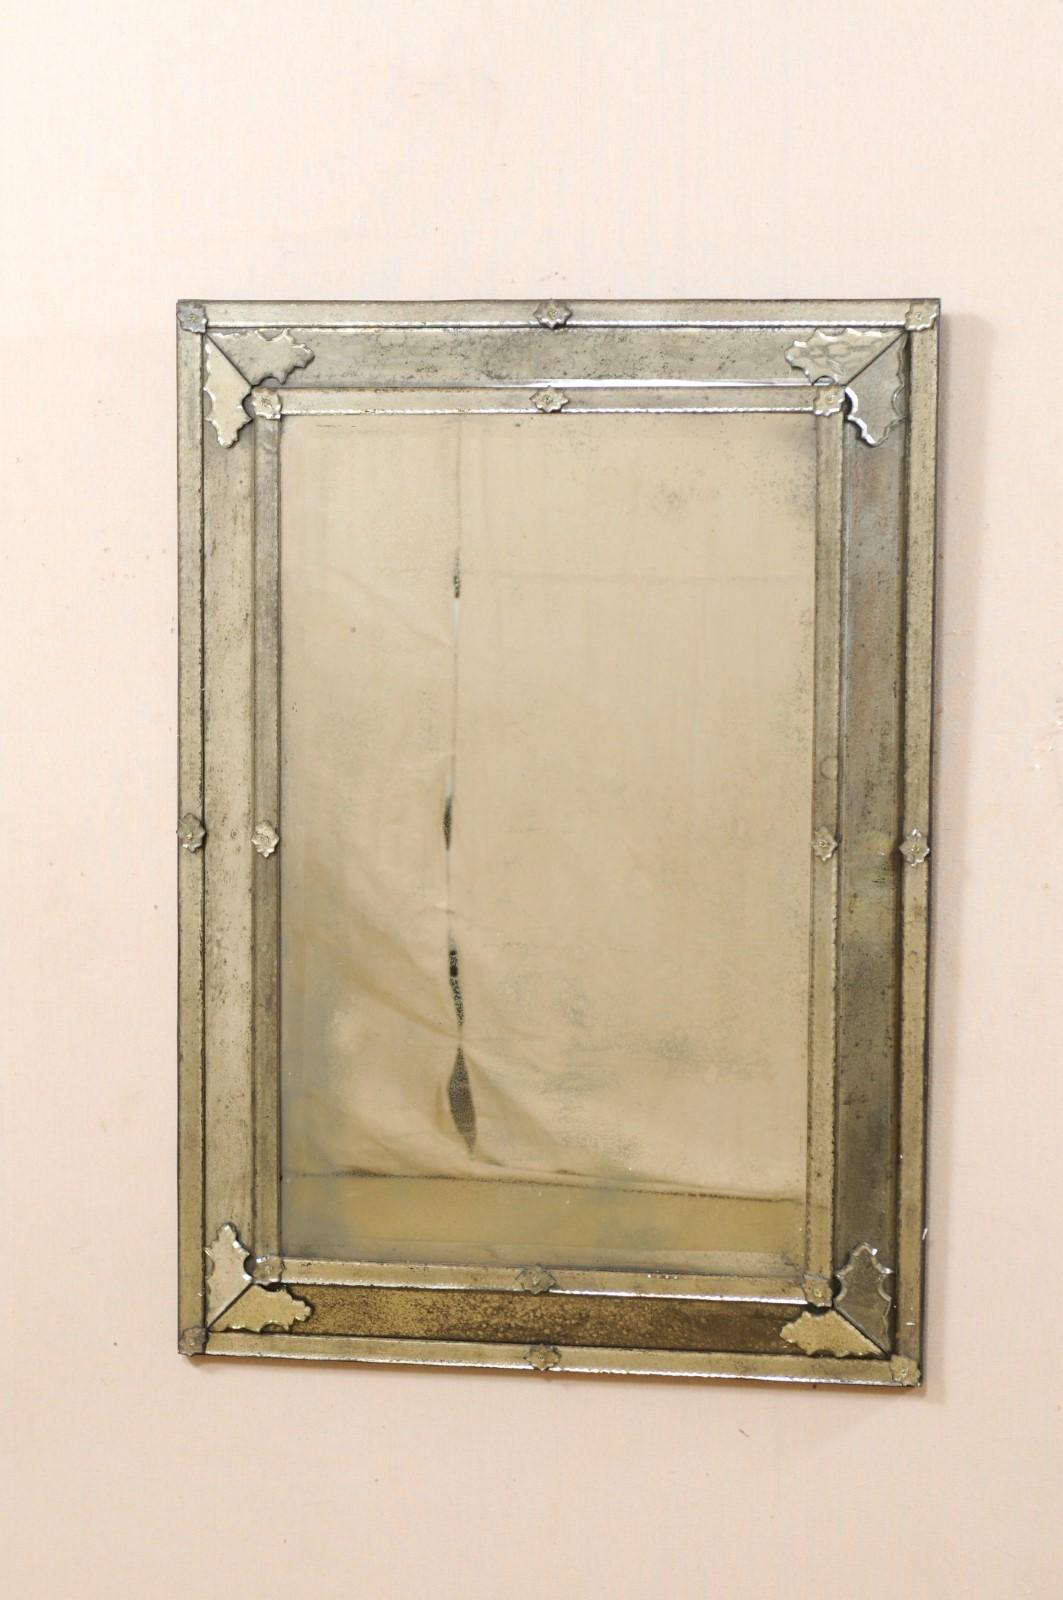 A Venetian style rectangular-shaped mirror, artisan created and hand-silvered. This custom Venetian style mirror (which we refer to as the 